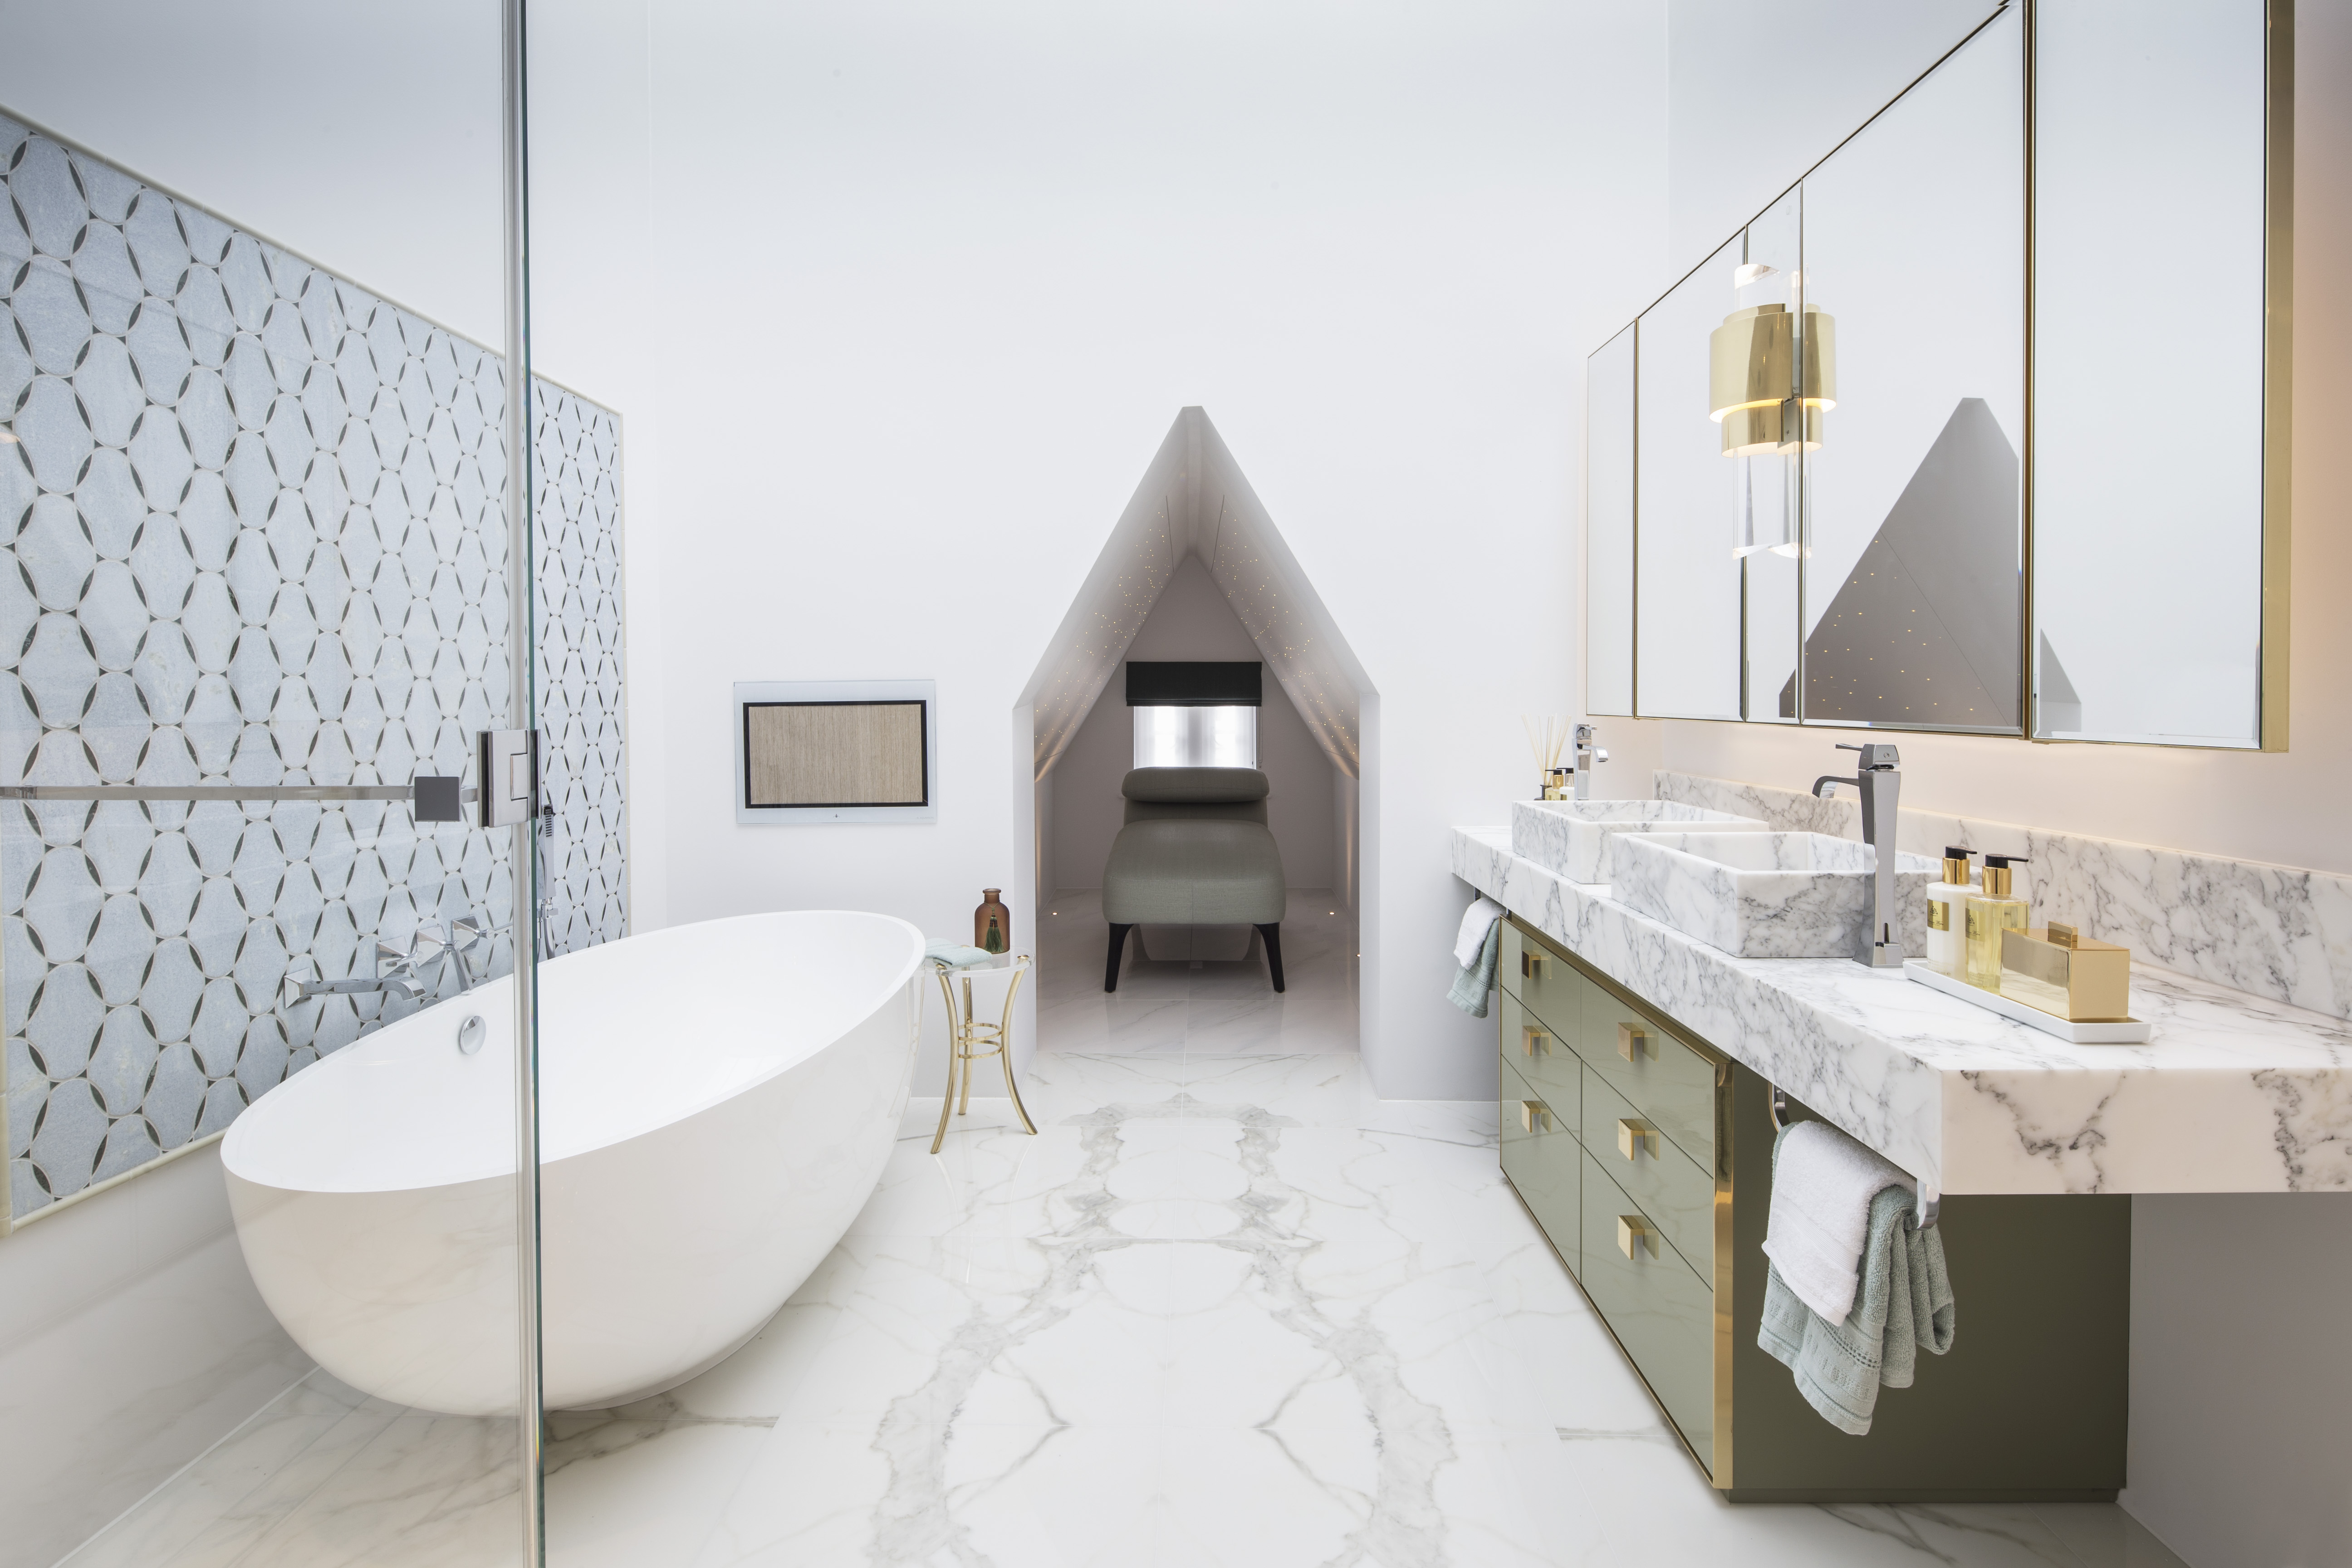 spa-like bathroom with large oval freestanding bath, marble vanity and daybed